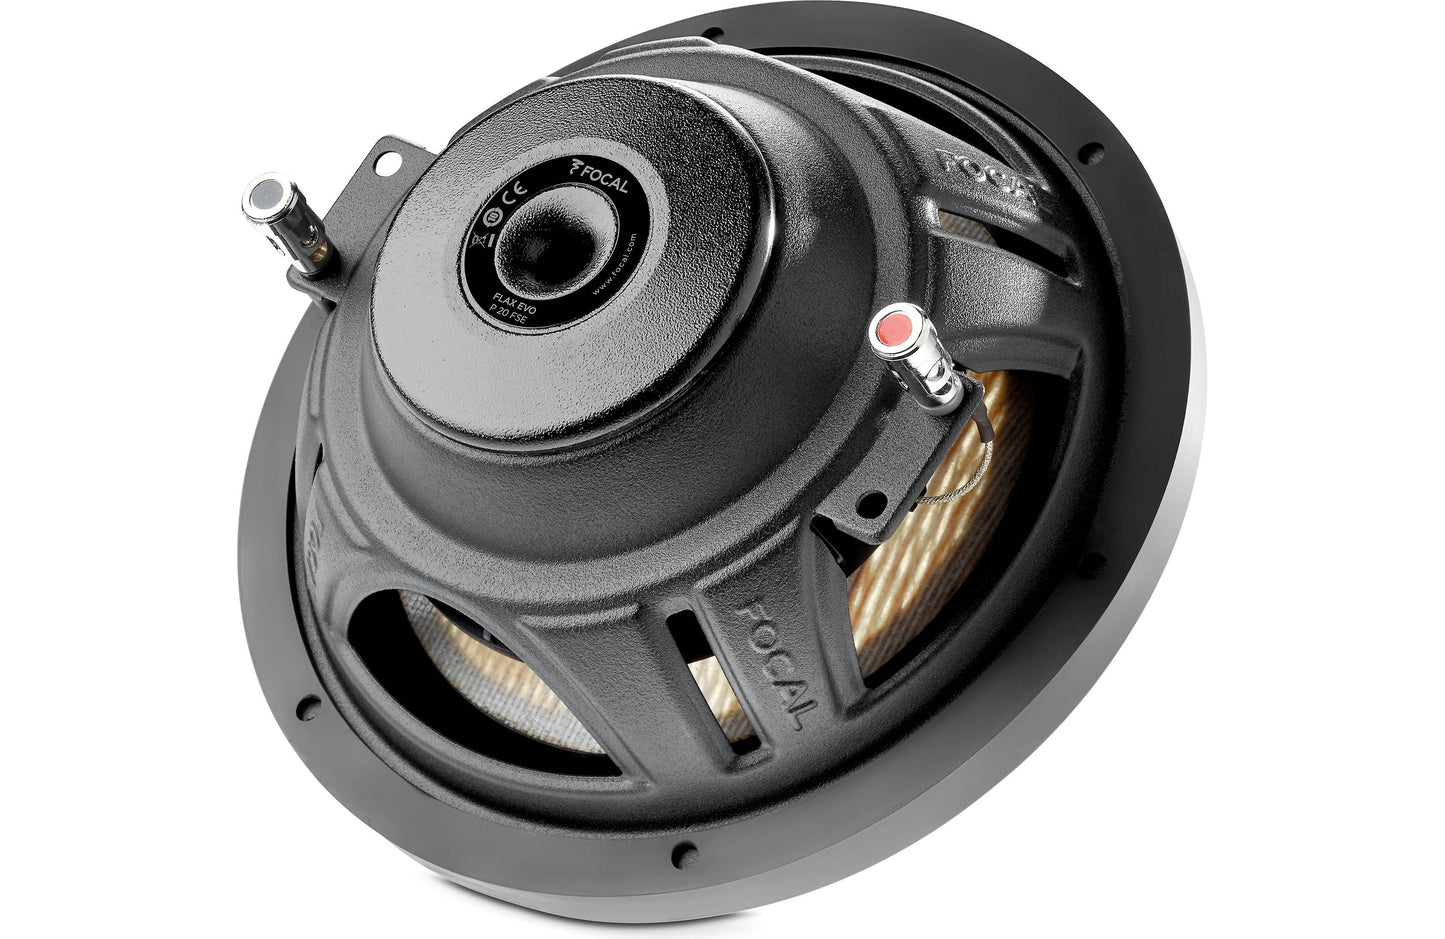 Focal P 20 FSE Flax Evo Series shallow-mount 8" 4-ohm component subwoofer